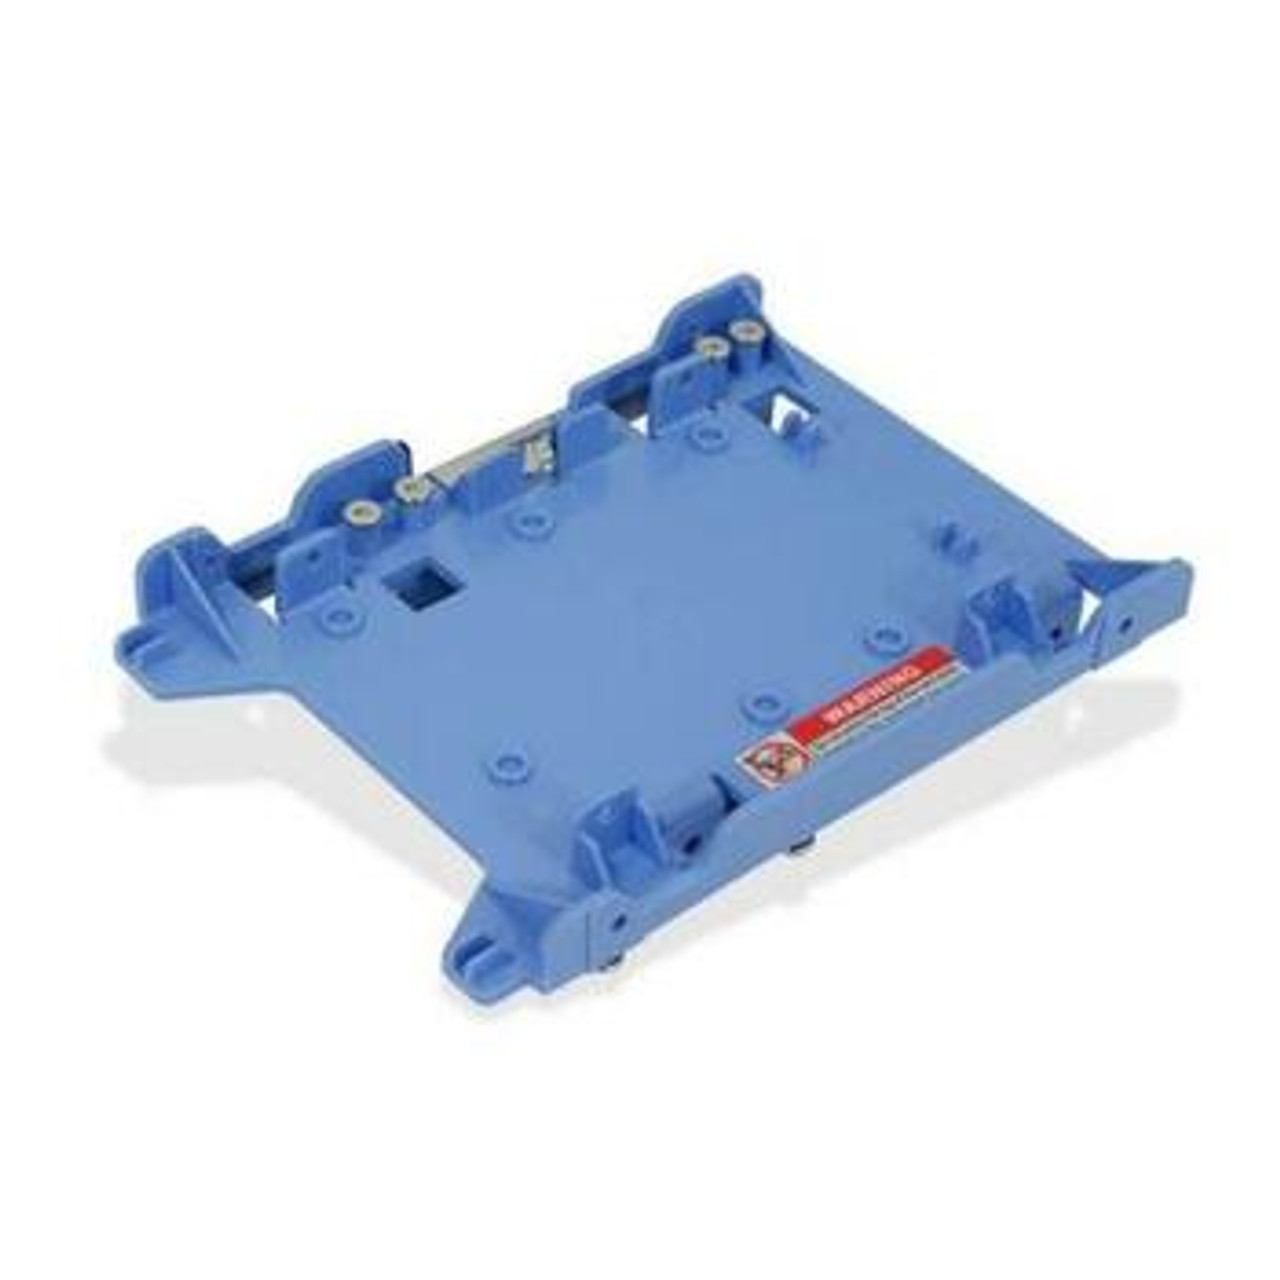 F767D Dell Bracket Assembly Hard Drive Caddy 2.5-inch for OptiPlex 960 980 990